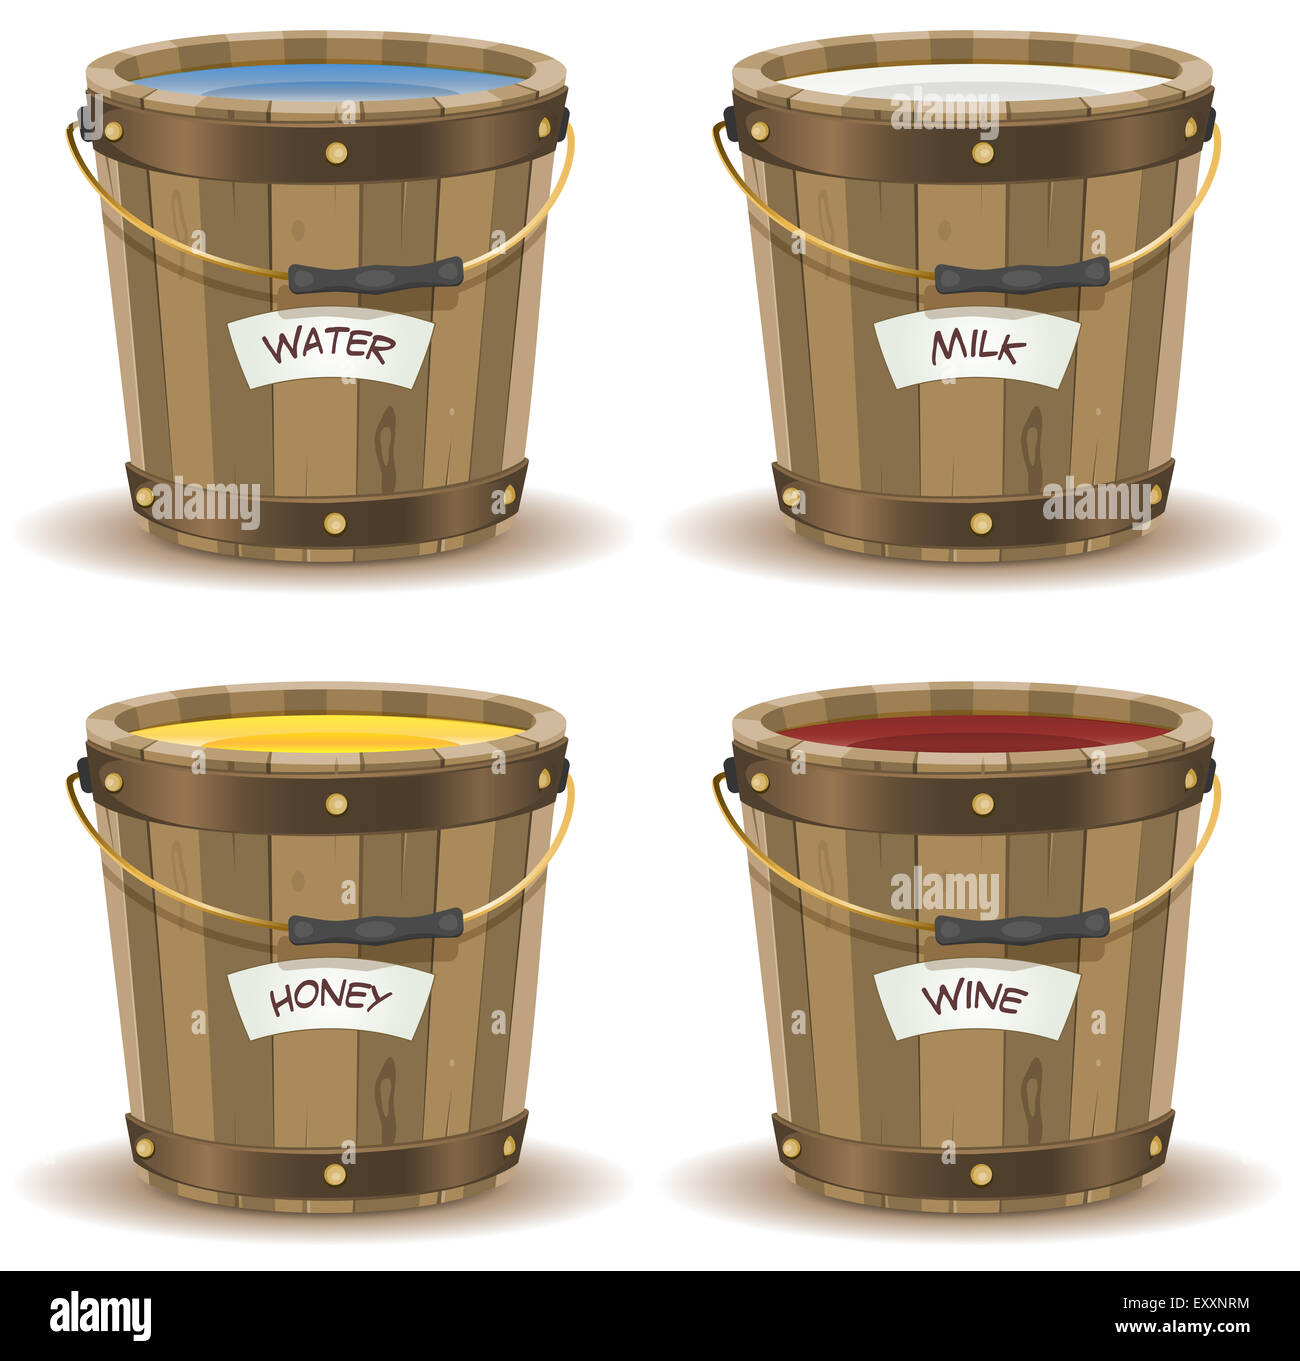 Illustration of a set of cartoon wooden bucket with handle and gold metal strapping, containing various liquid beverage Stock Photo